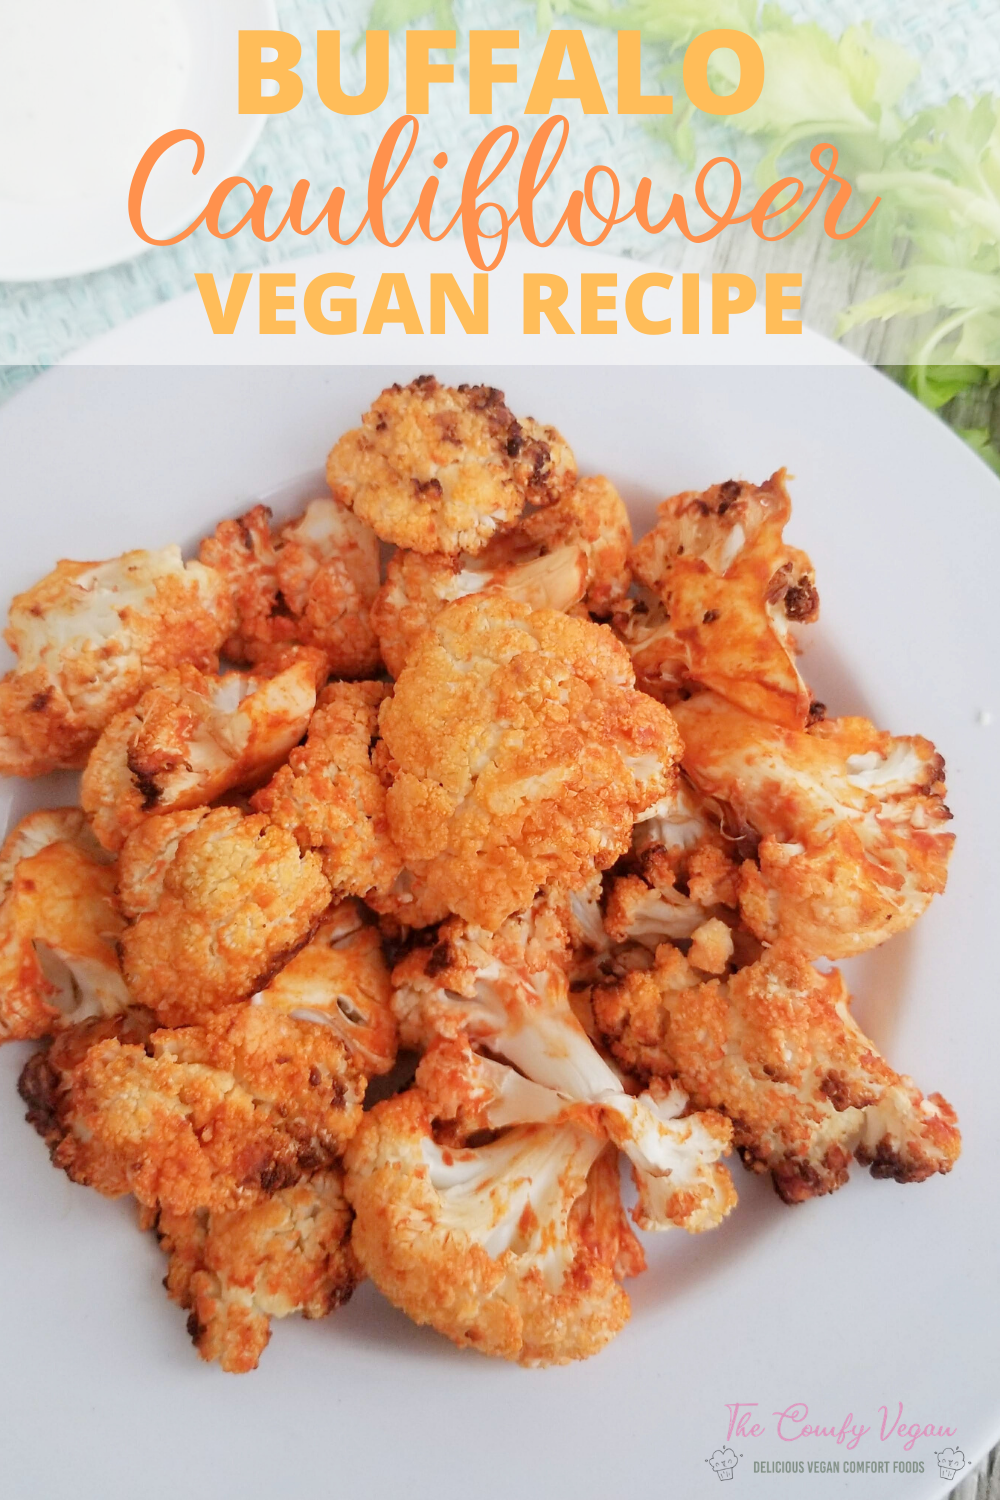 These addictive crispy air fryer vegan buffalo cauliflower bites are easy to make and will be a huge hit with vegans and meat eaters.